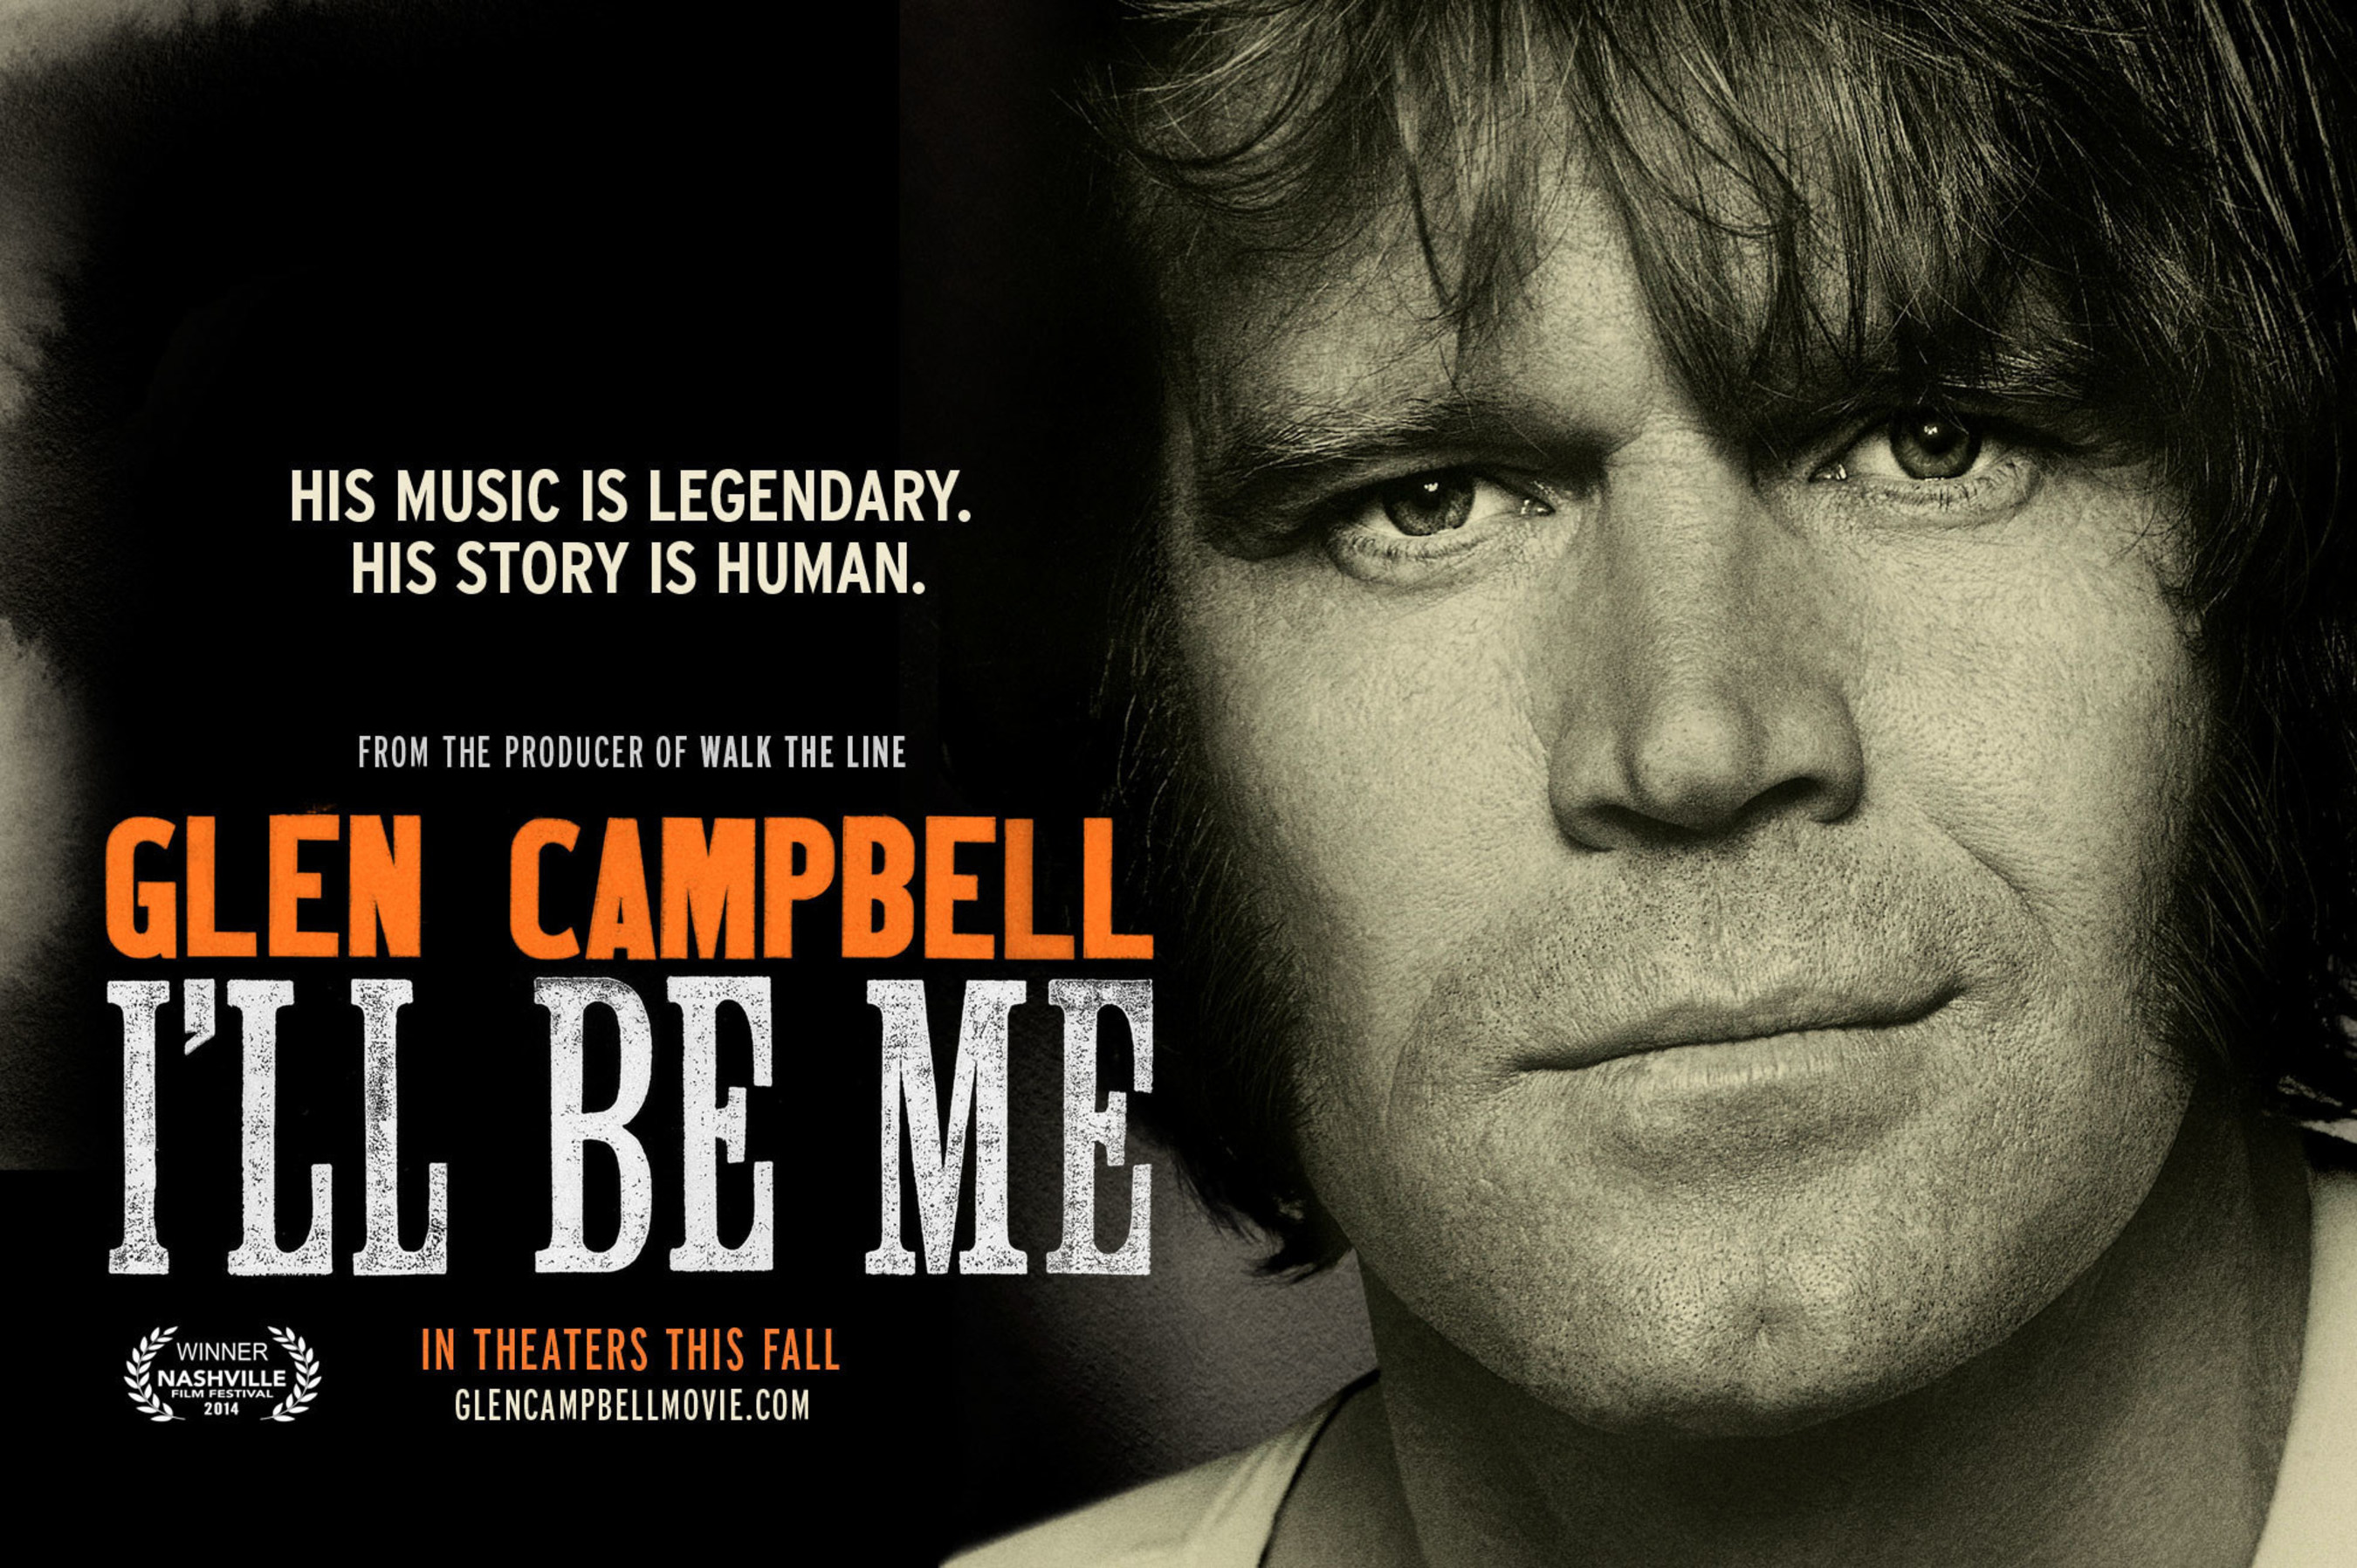 "Glen Campbell...I'll Be Me" opens in theaters October 24 (PRNewsFoto/PCH Films)